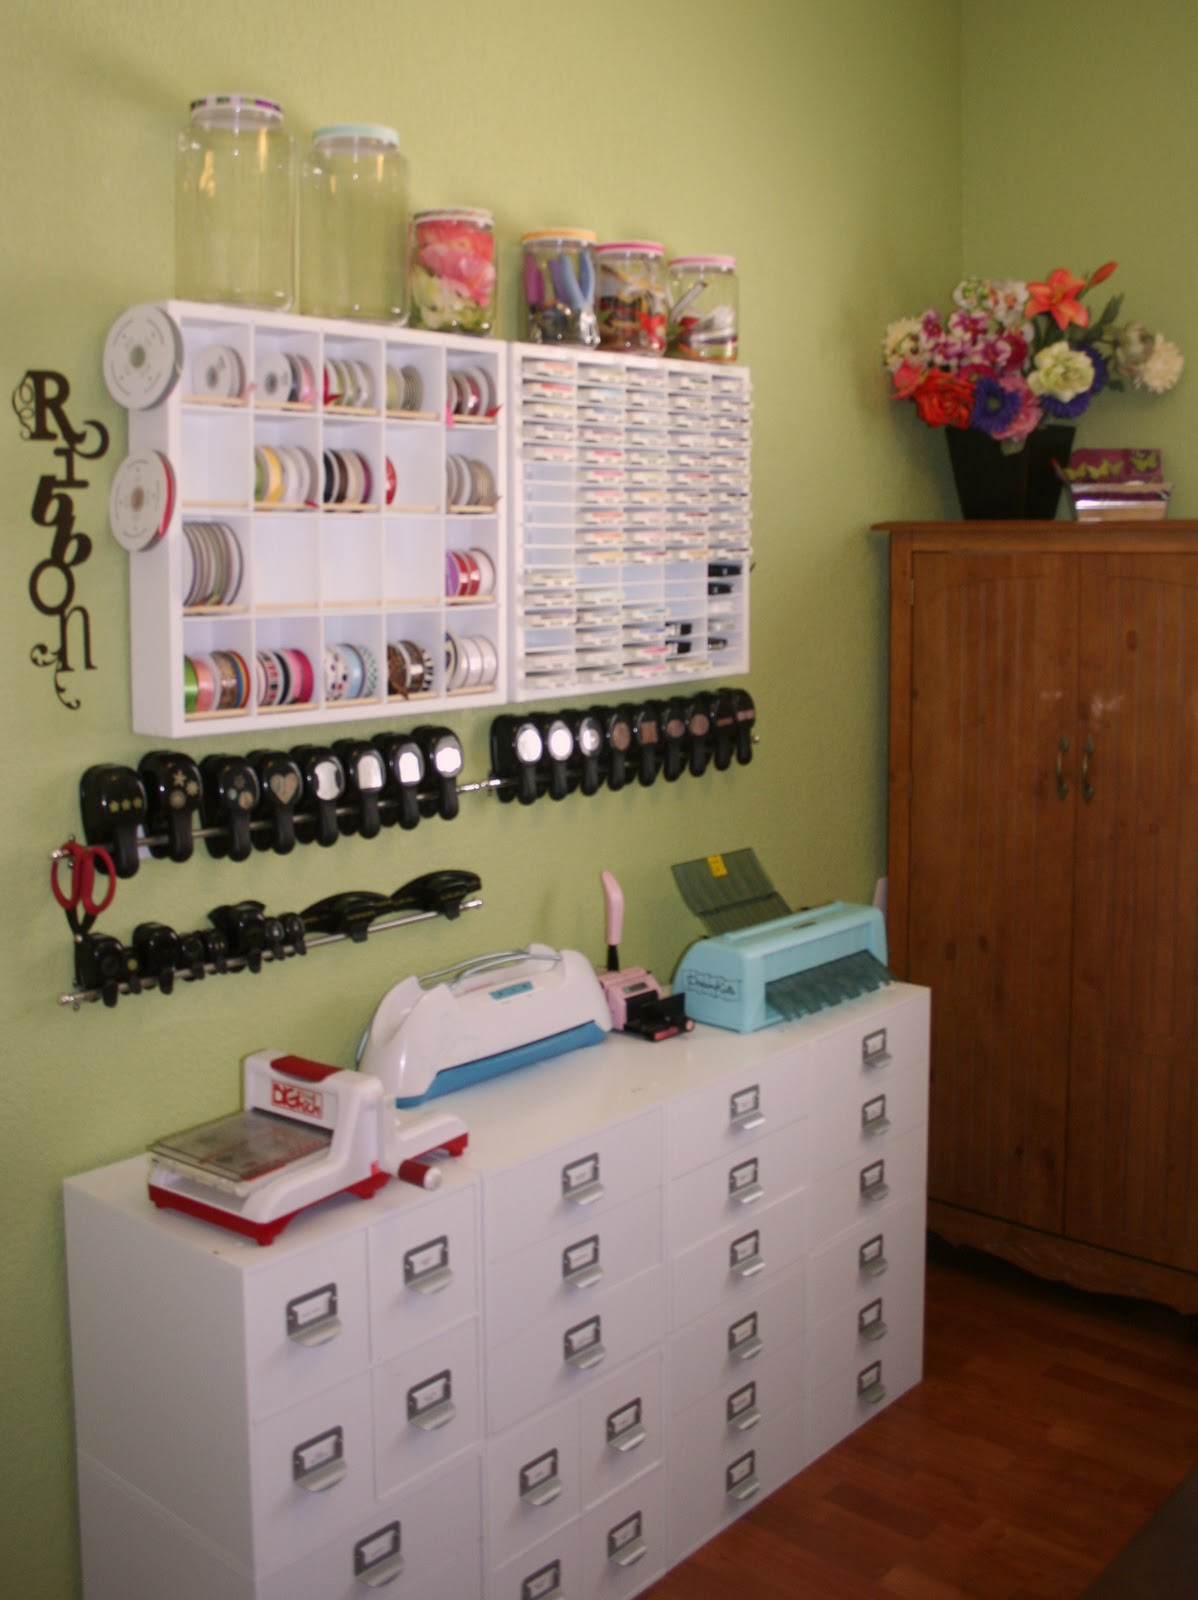 Sprinkled With Glitter: Welcome To My Craft Room